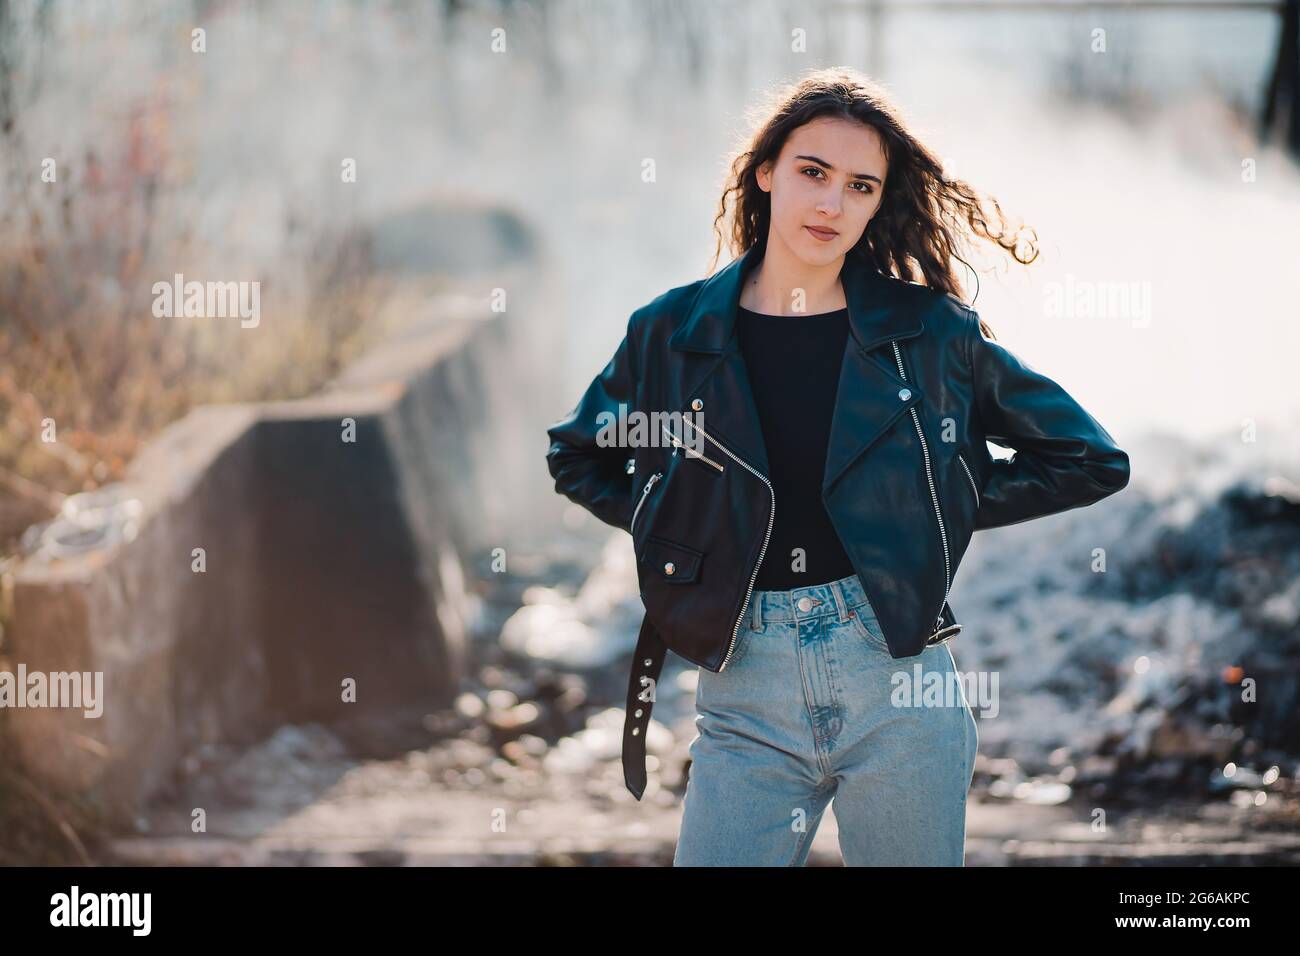 Outdoor portrait of a beautiful teen brunette girl in the black leather jacket with smoke in the background Stock Photo